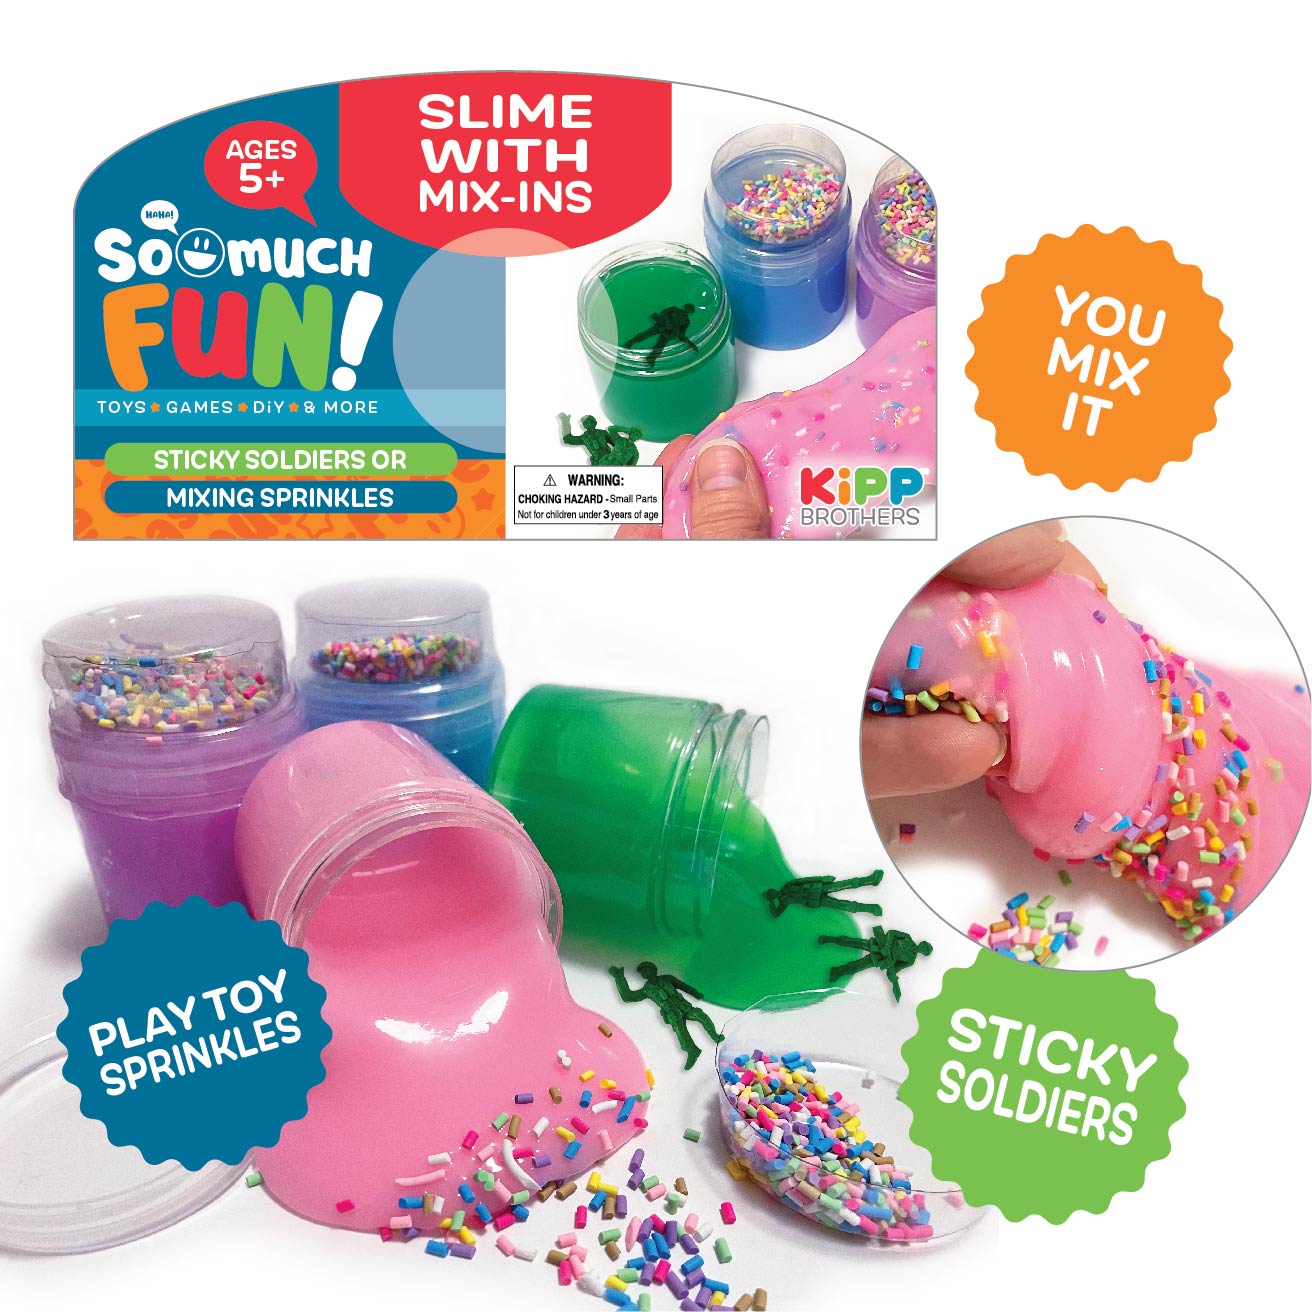 Slime with Mix-in's – Kipp Brothers